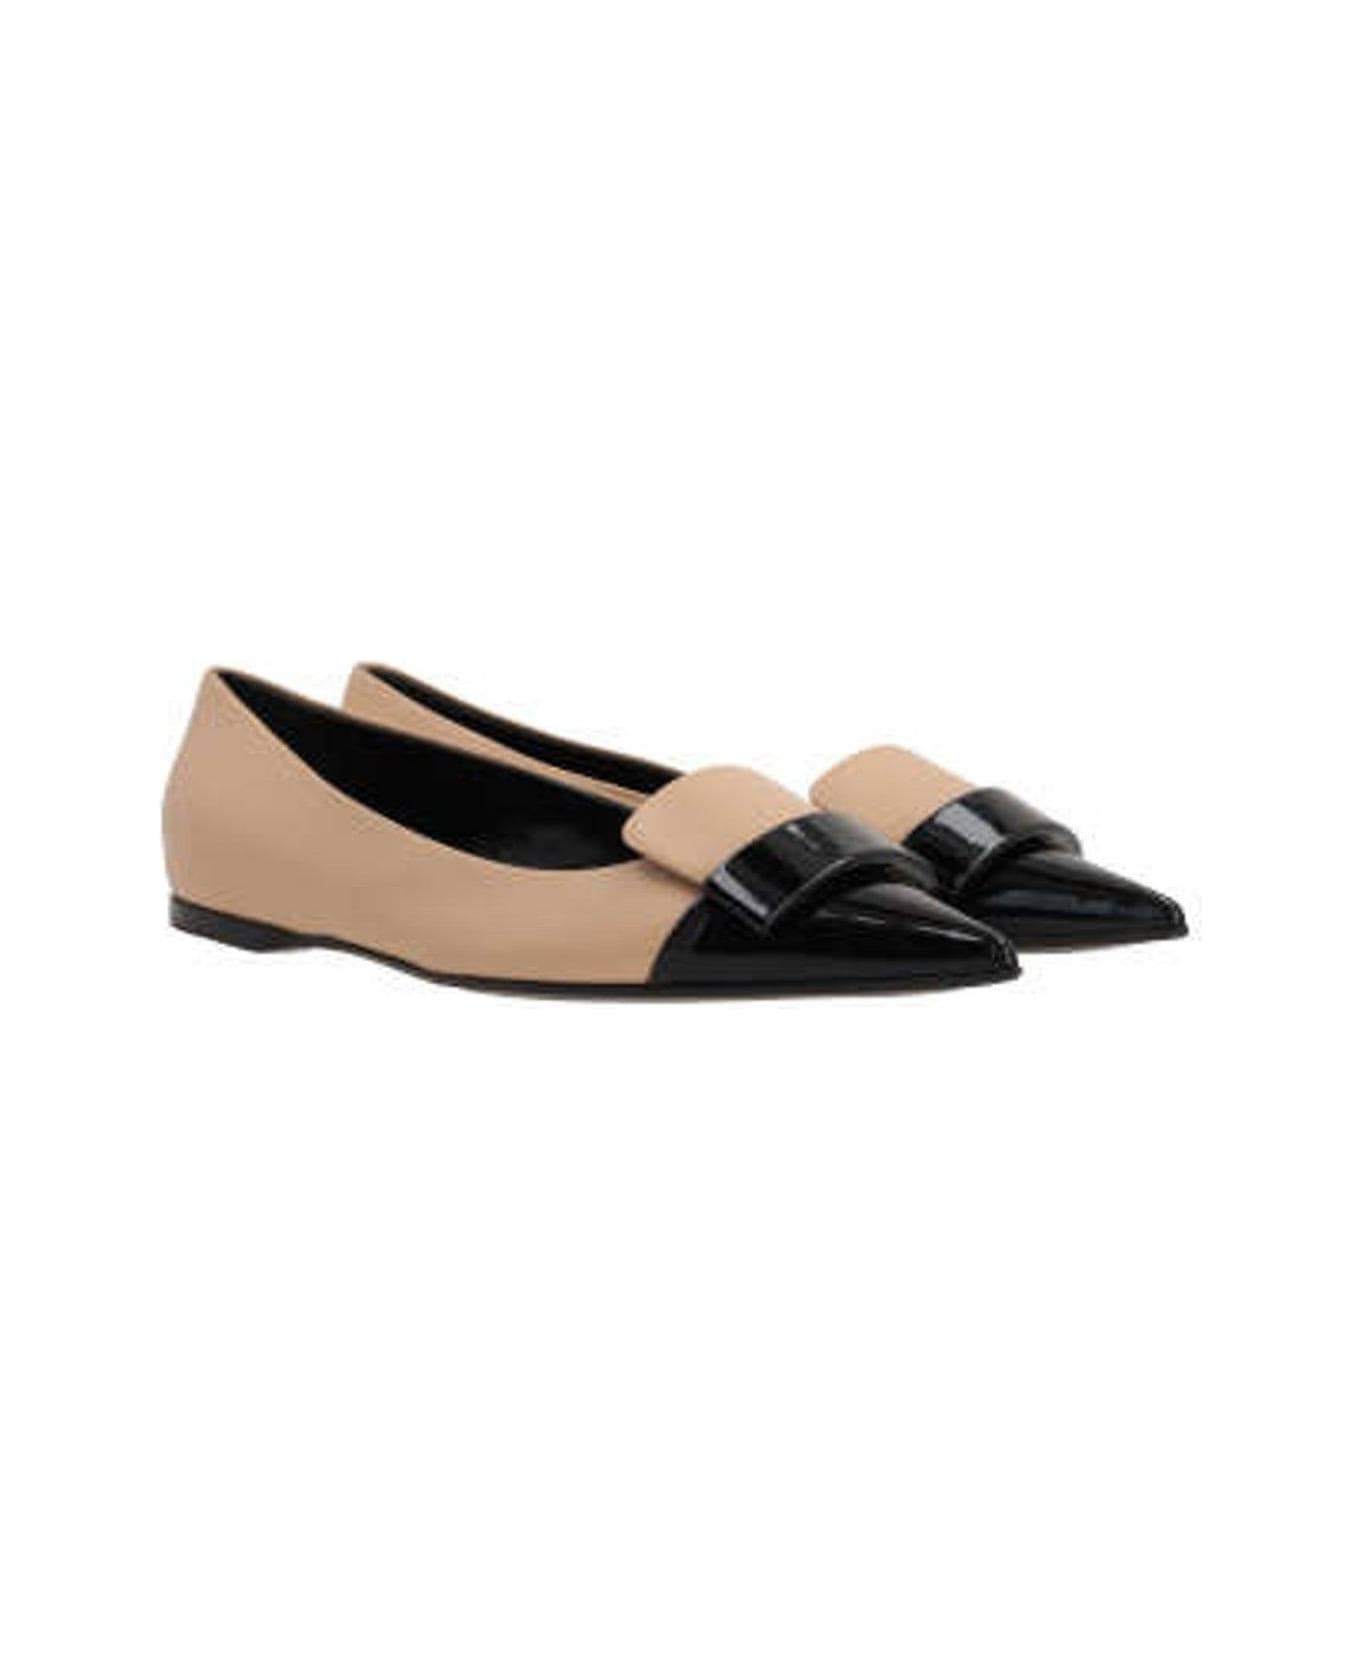 Sergio Rossi Pointed-toe Slip-on Flat Shoes - Beige